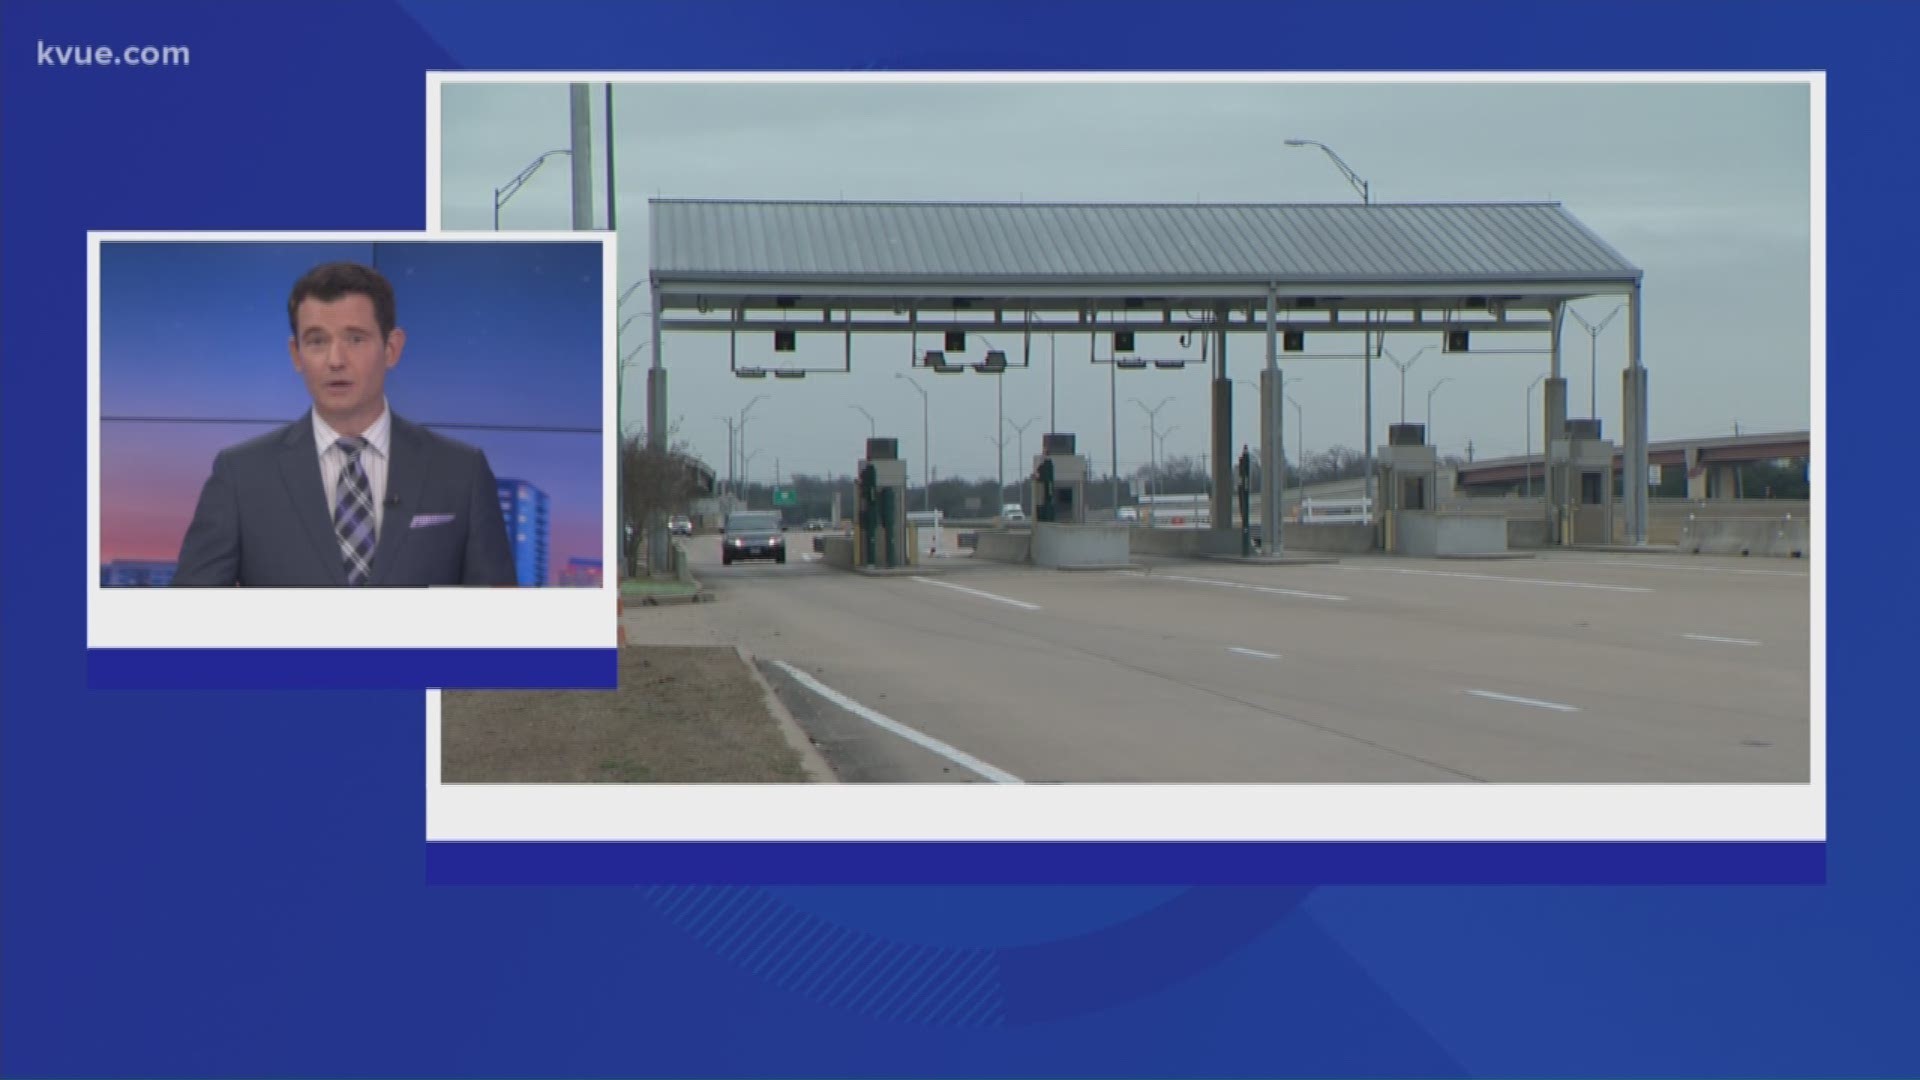 TxDOT confirmed to KVUE that all unpaid late fees that were incurred prior to March 1 will be waived.